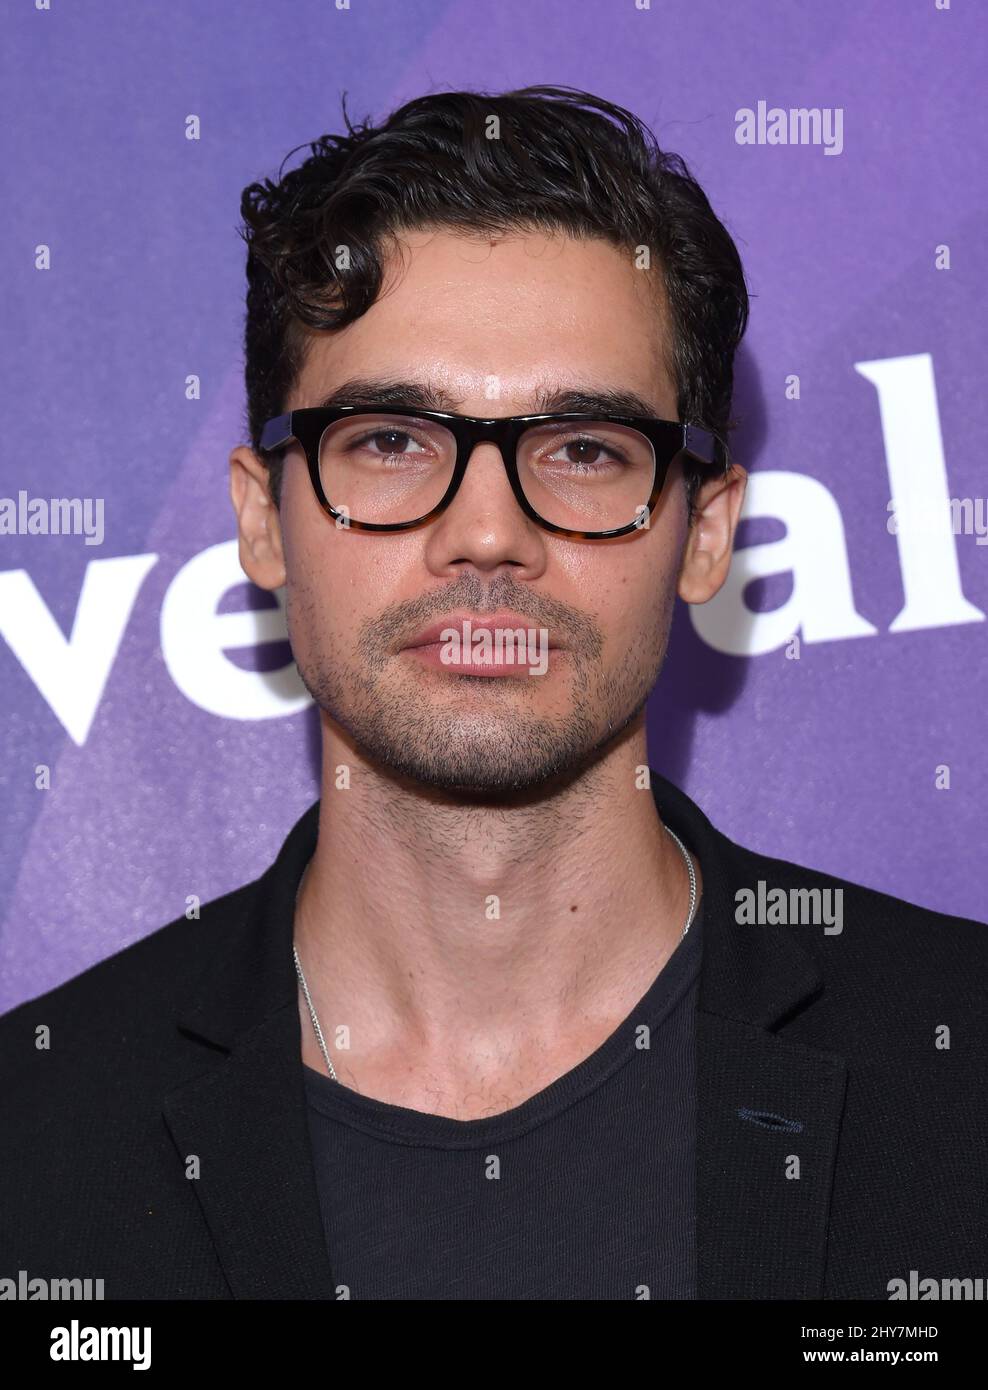 Steven Strait attends the NBCUniversal Summer 2015 TCA's held at the